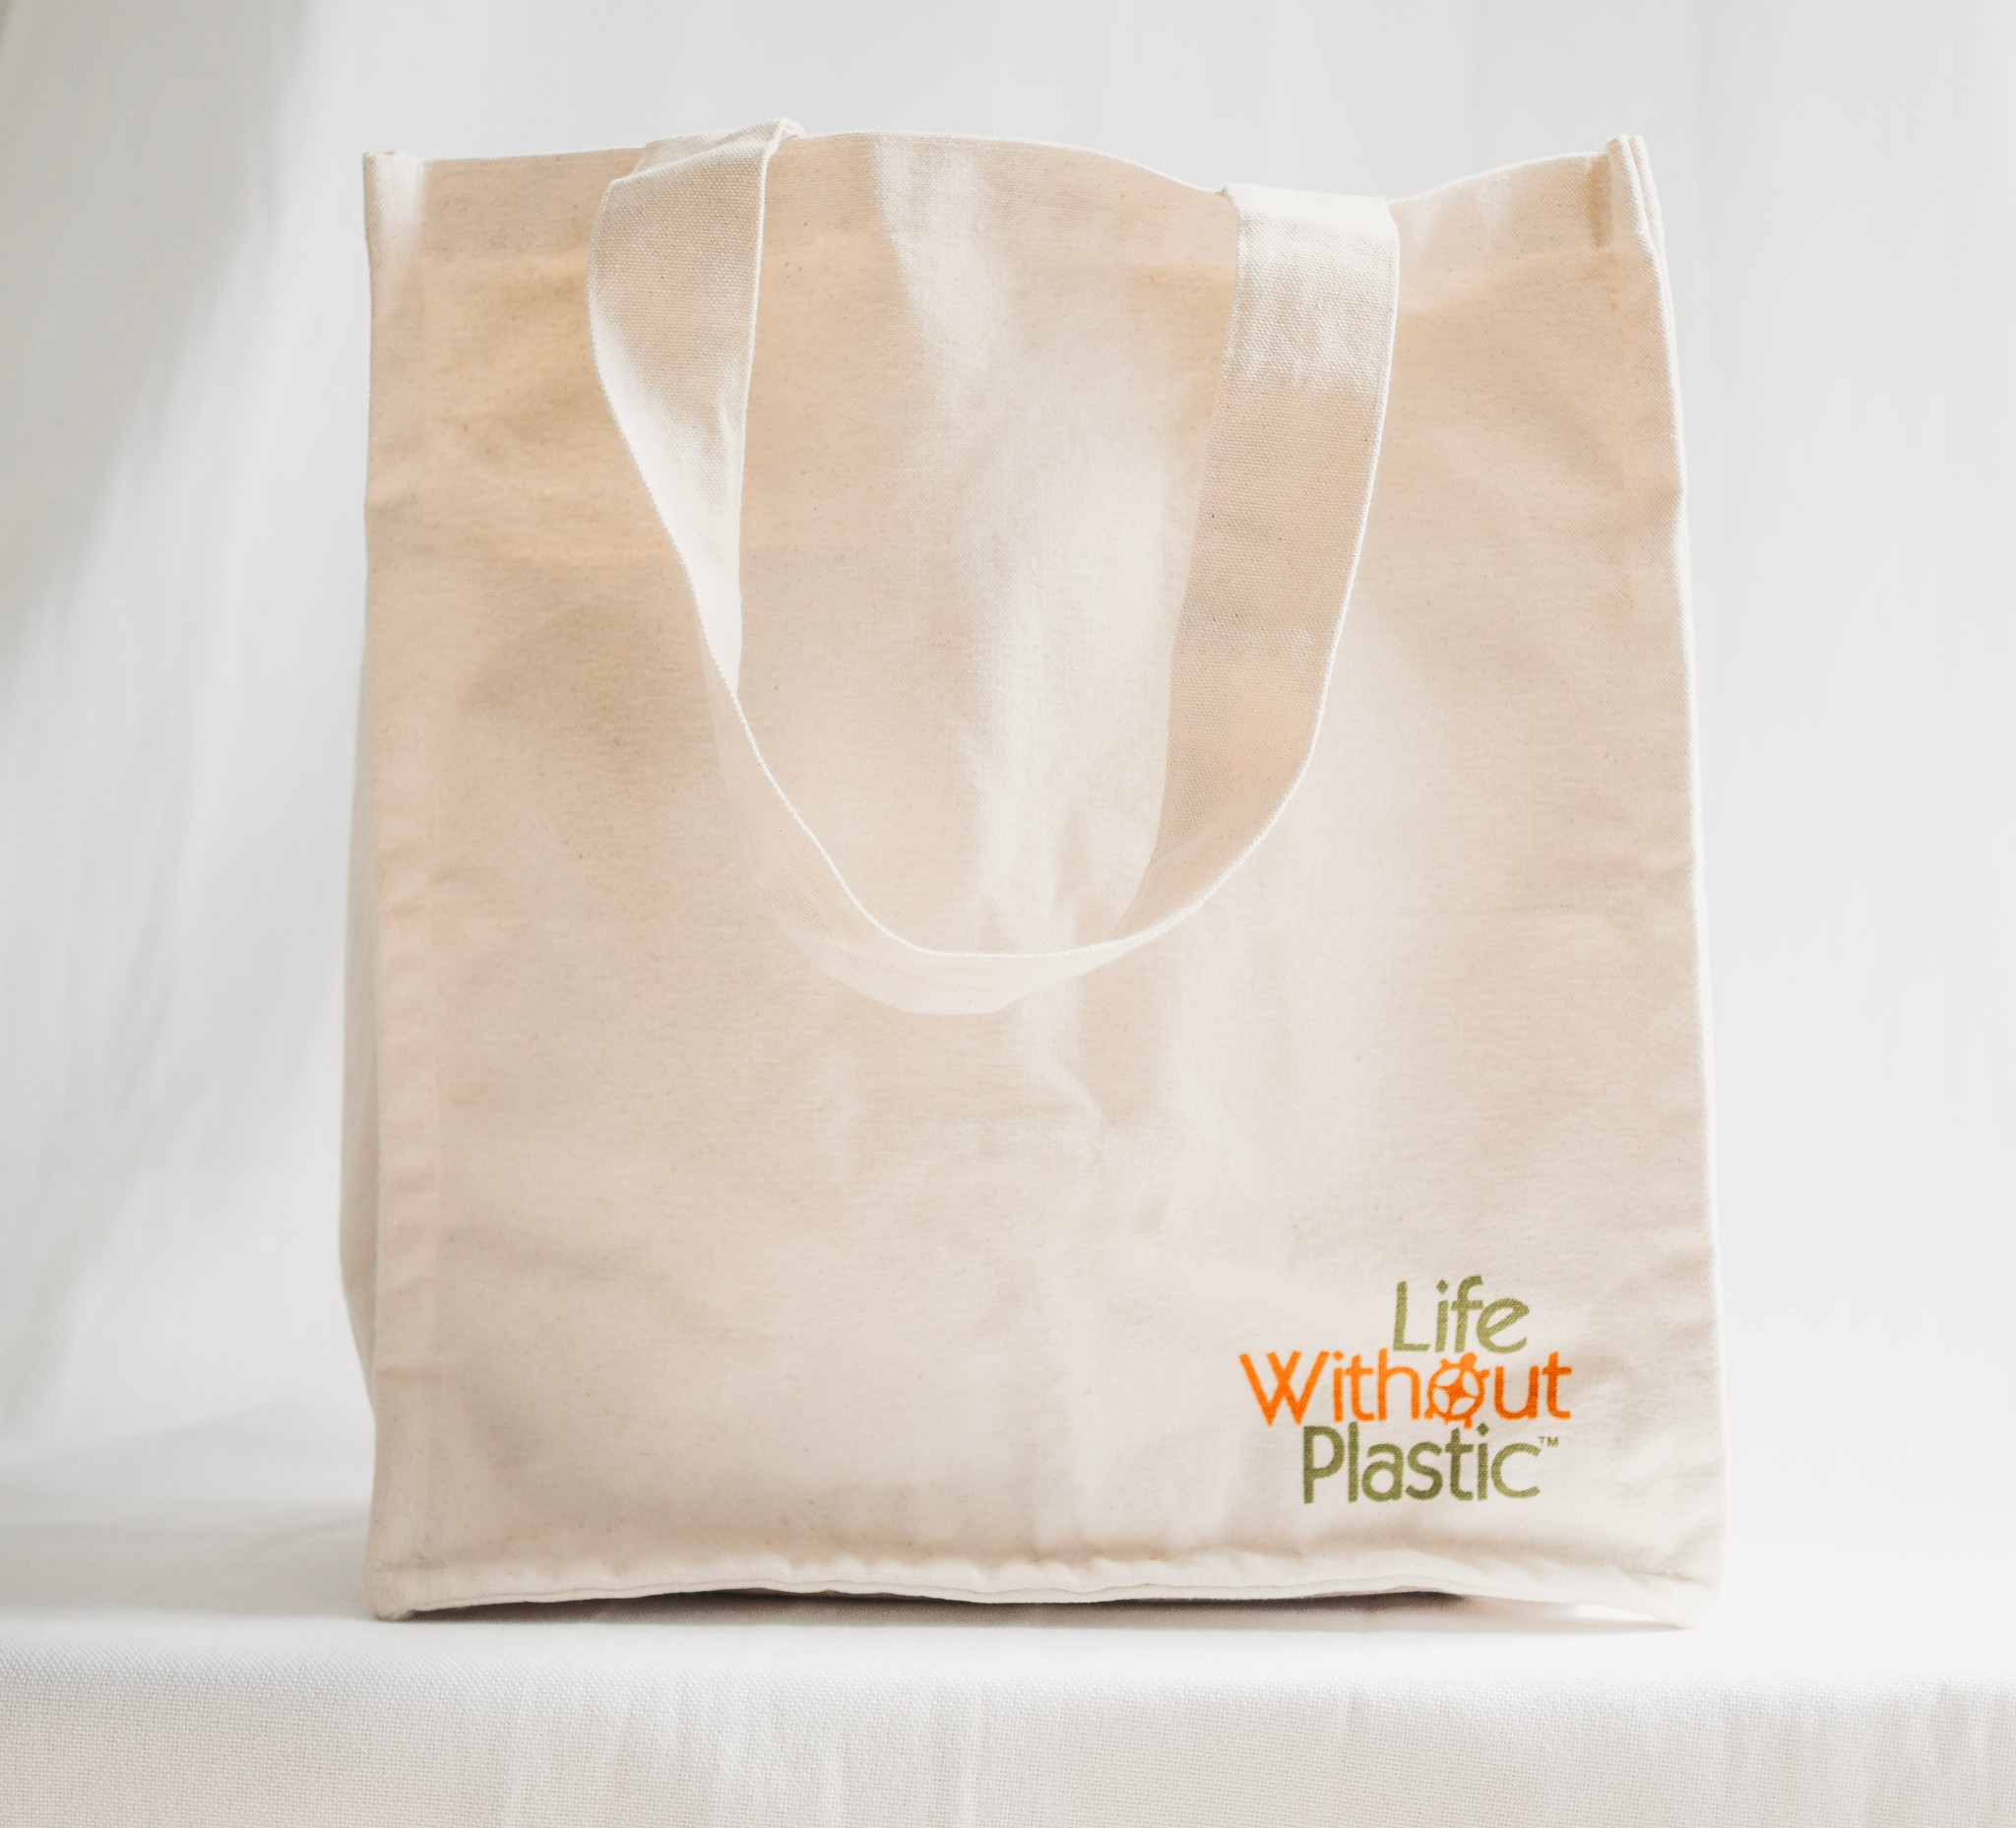 Wholesale Canvas Cotton Grocery Tote Bags with Compartments